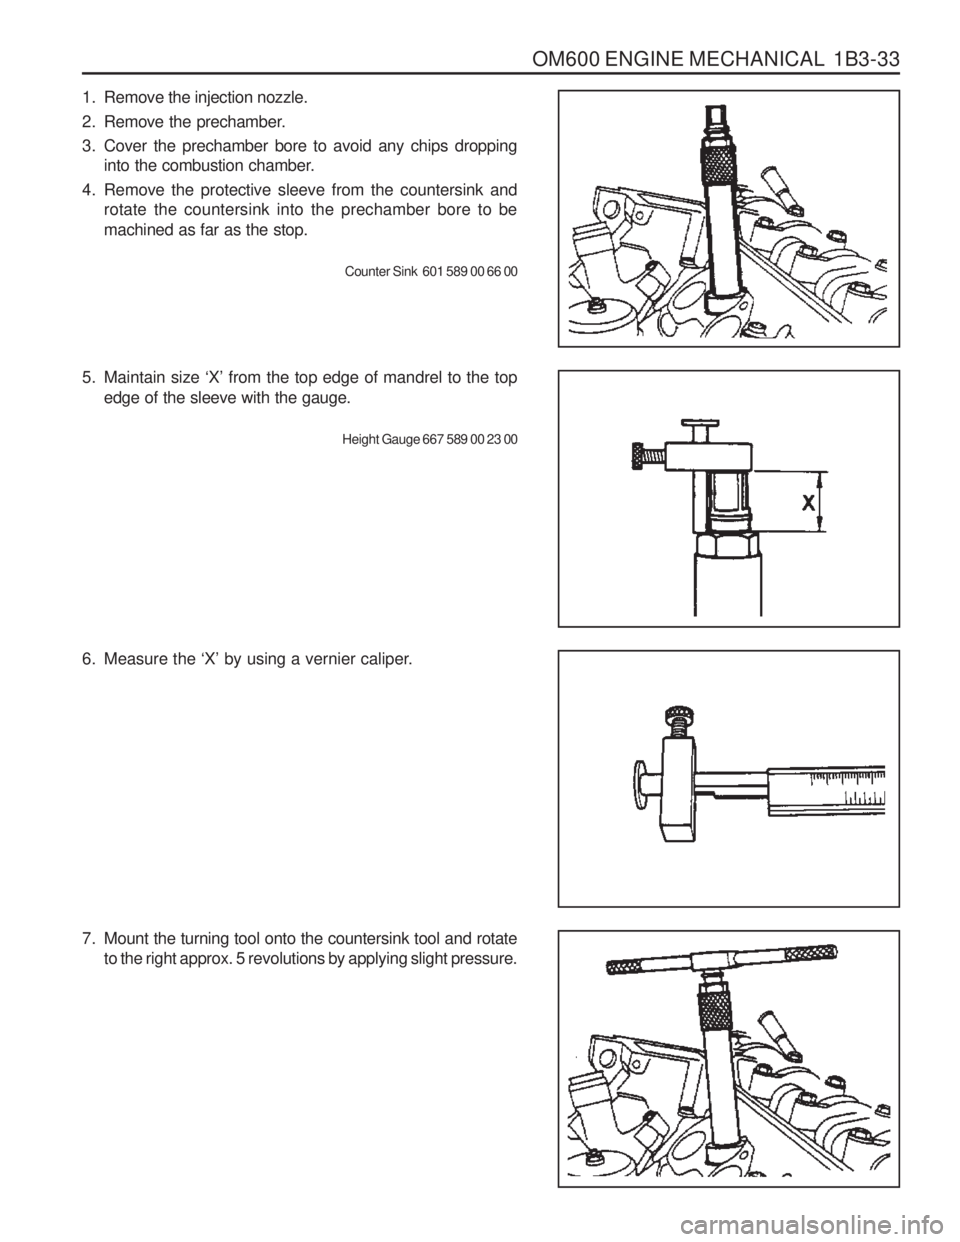 SSANGYONG MUSSO 2003  Service Manual OM600 ENGINE MECHANICAL  1B3-33
6. Measure the ‘X’ by using a vernier caliper.
7. Mount the turning tool onto the countersink tool and rotate to the right approx. 5 revolutions by applying slight 